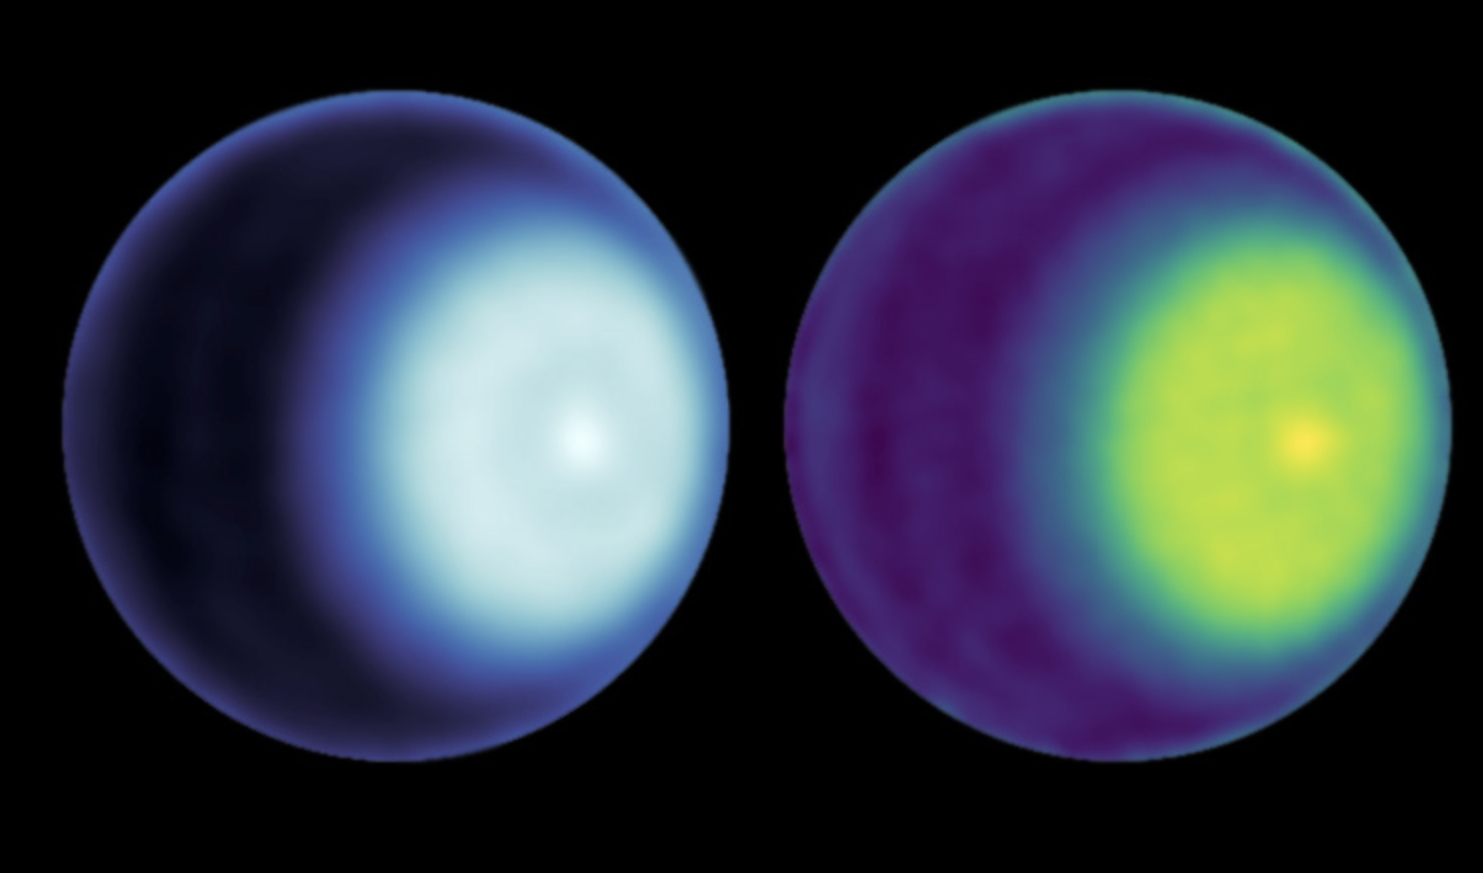 There's a polar vortex of Uranus: In these images, it's the brighter colored dot at right-center.